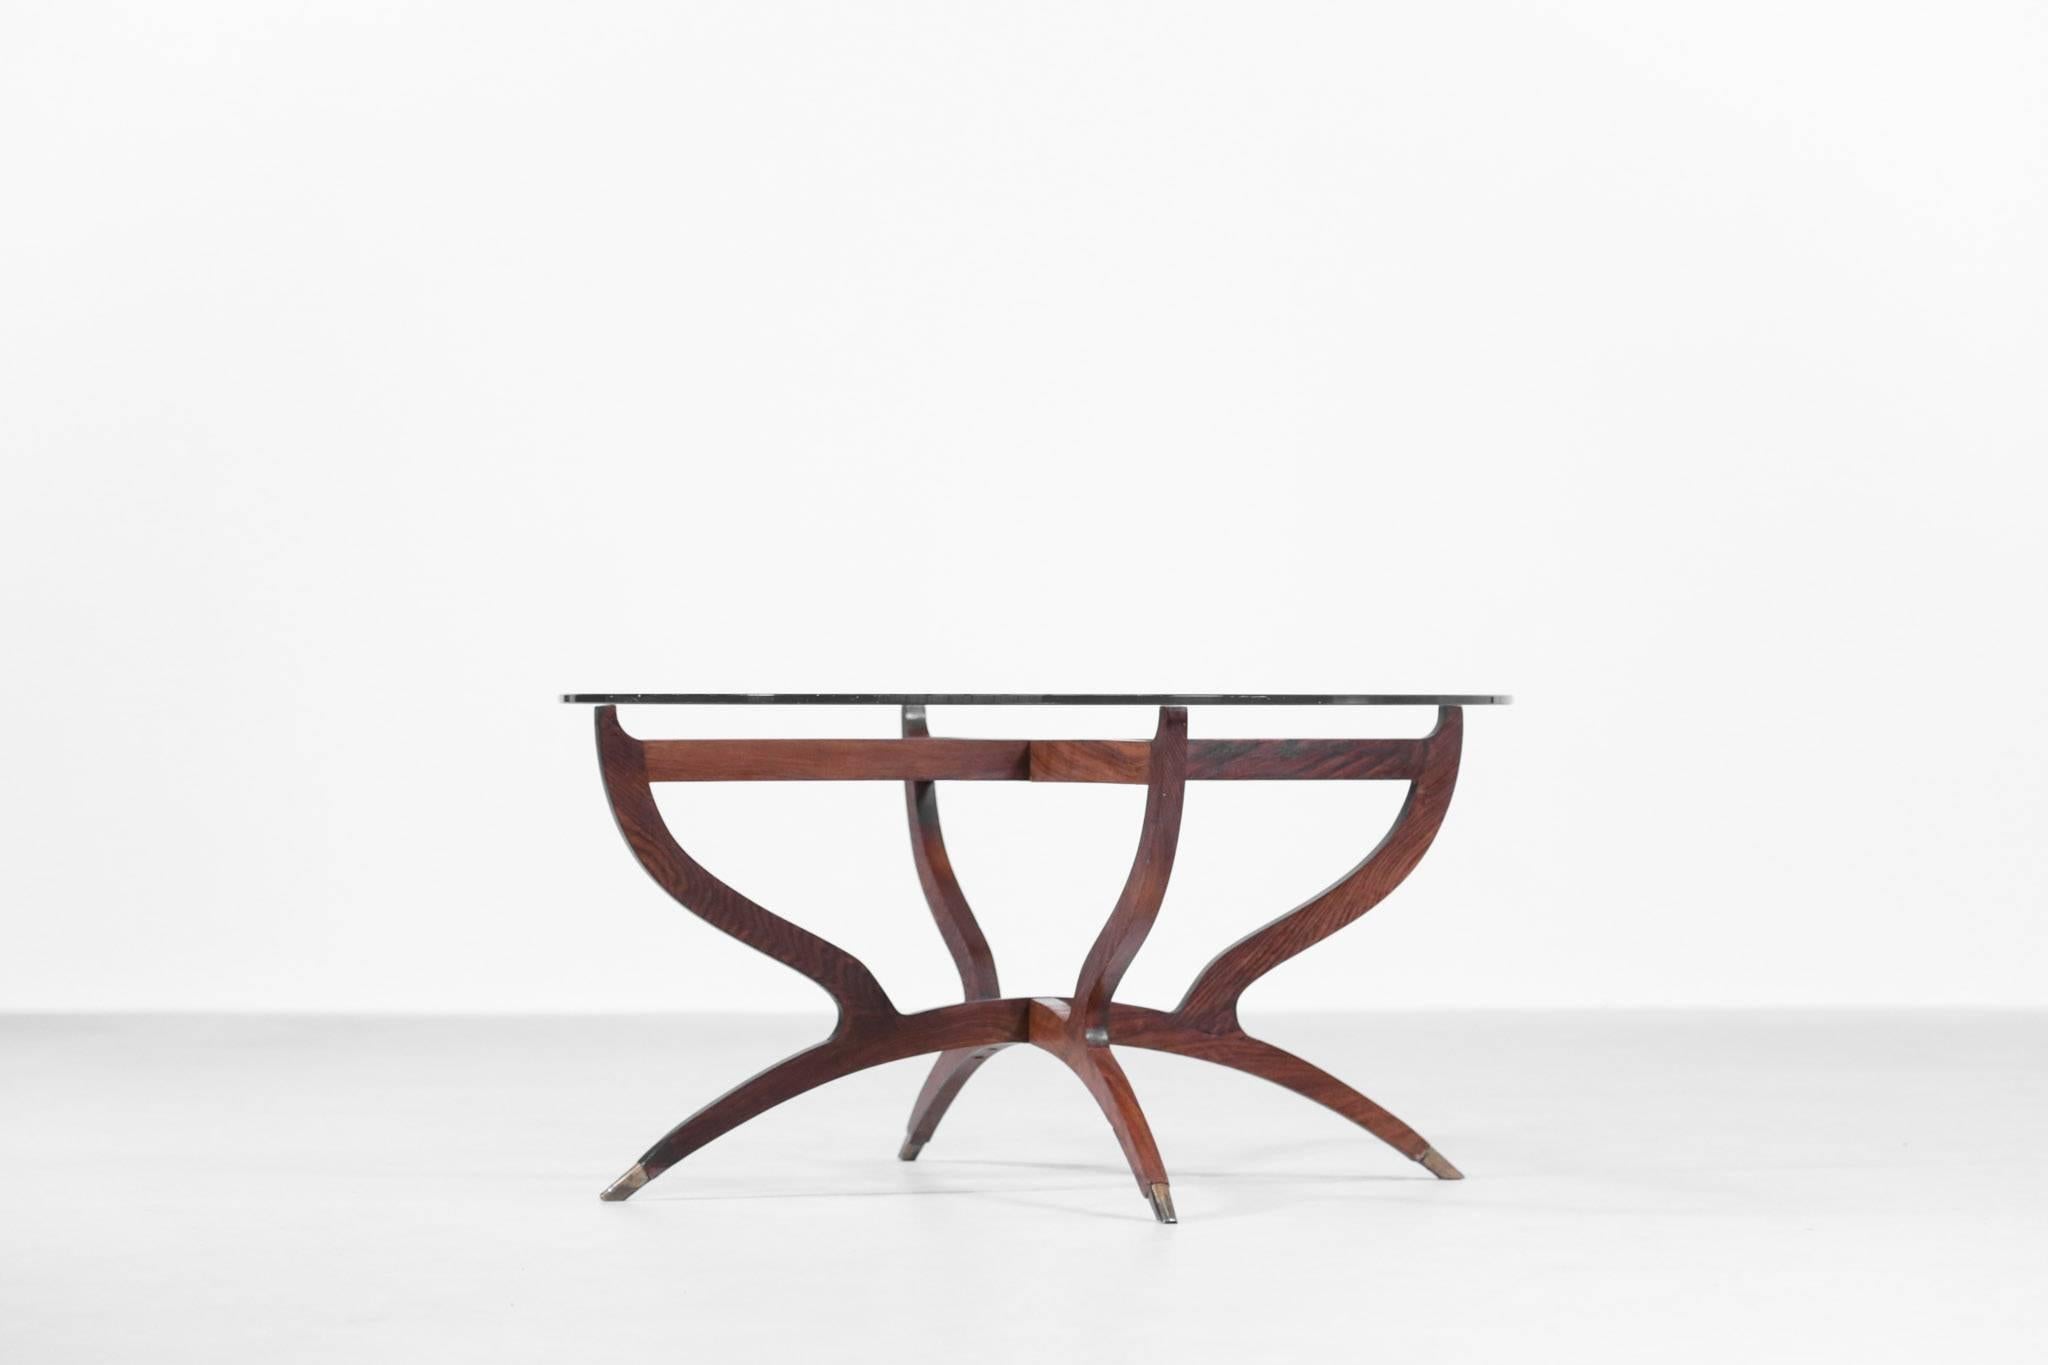 Nice design for this coffee table in the style of Italian designer, Gio Ponti. 
Foldable walnut frame with glass on the top.